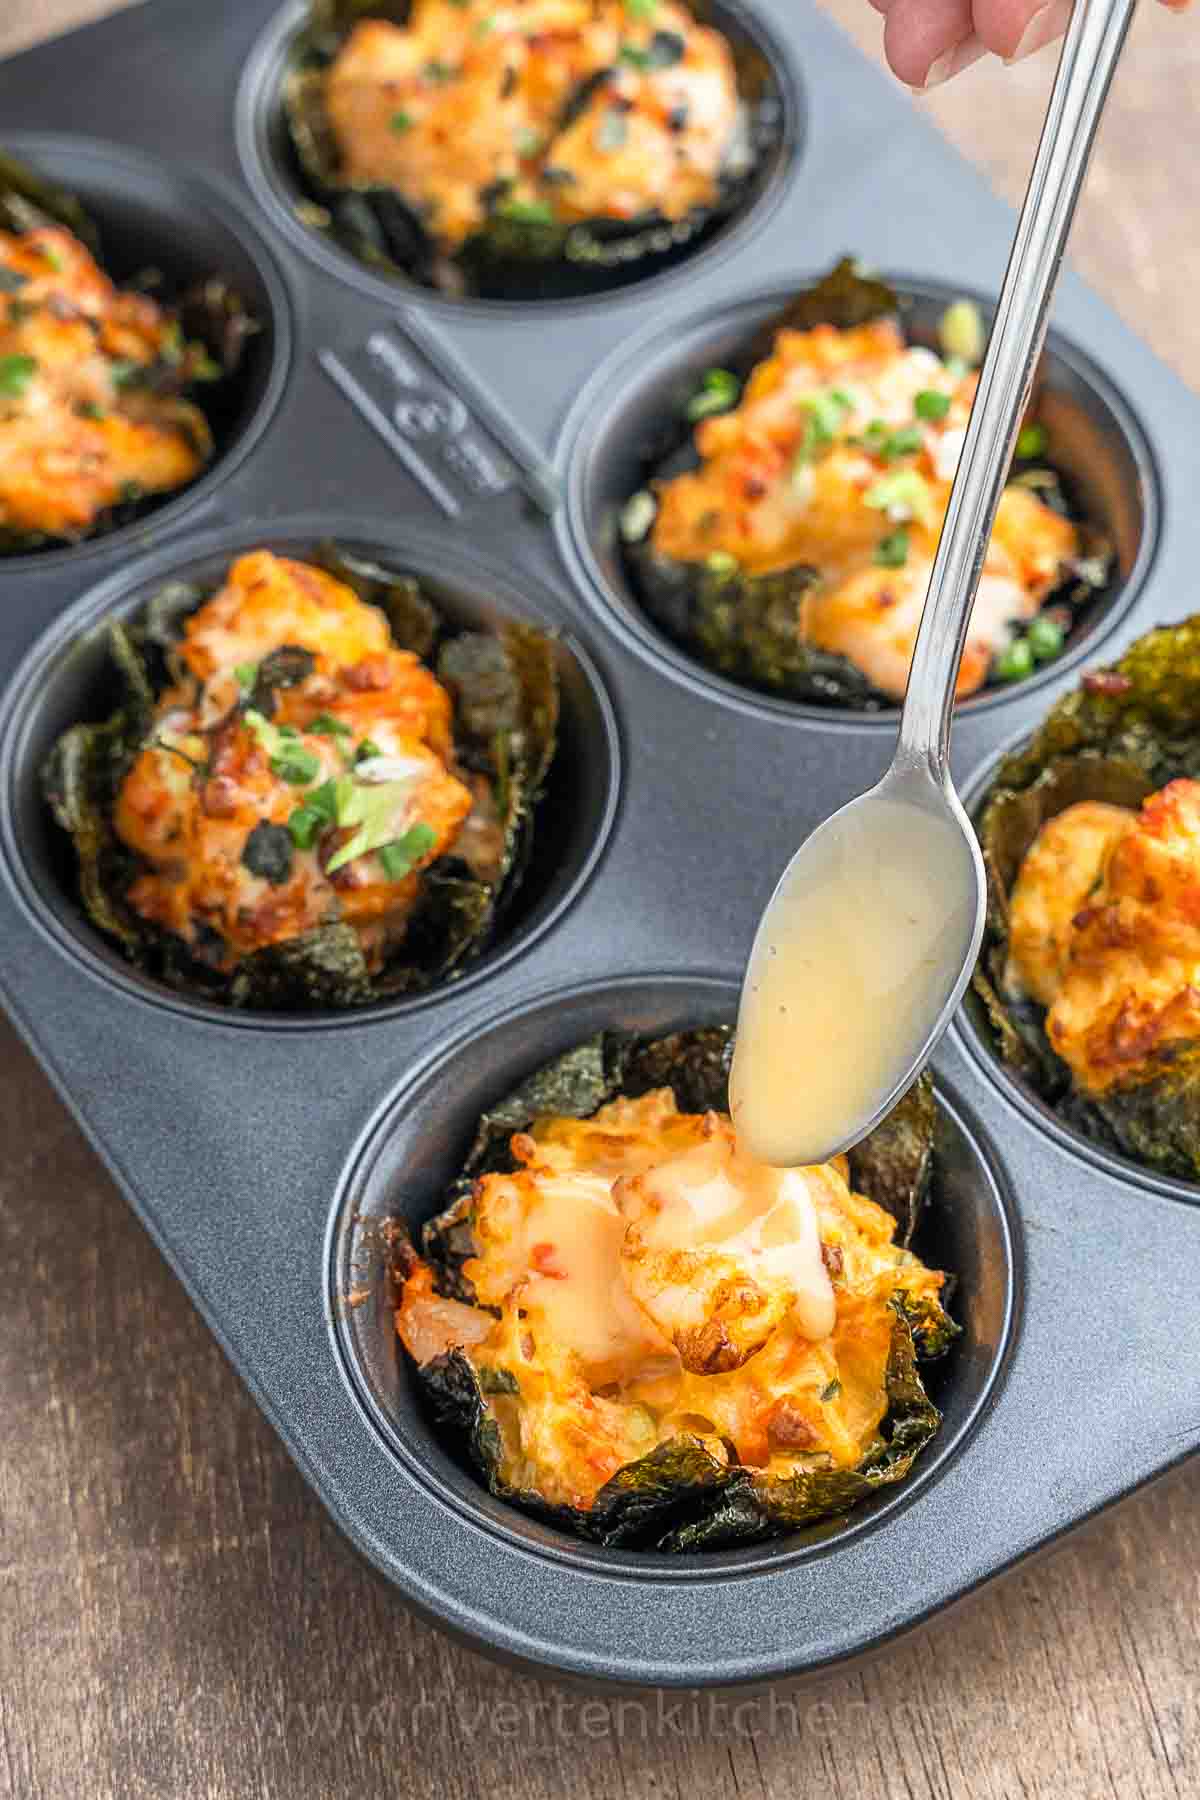 sushi bake cups with shrimp, imitation crab drizzled with sweet-chili and mayonnaise.